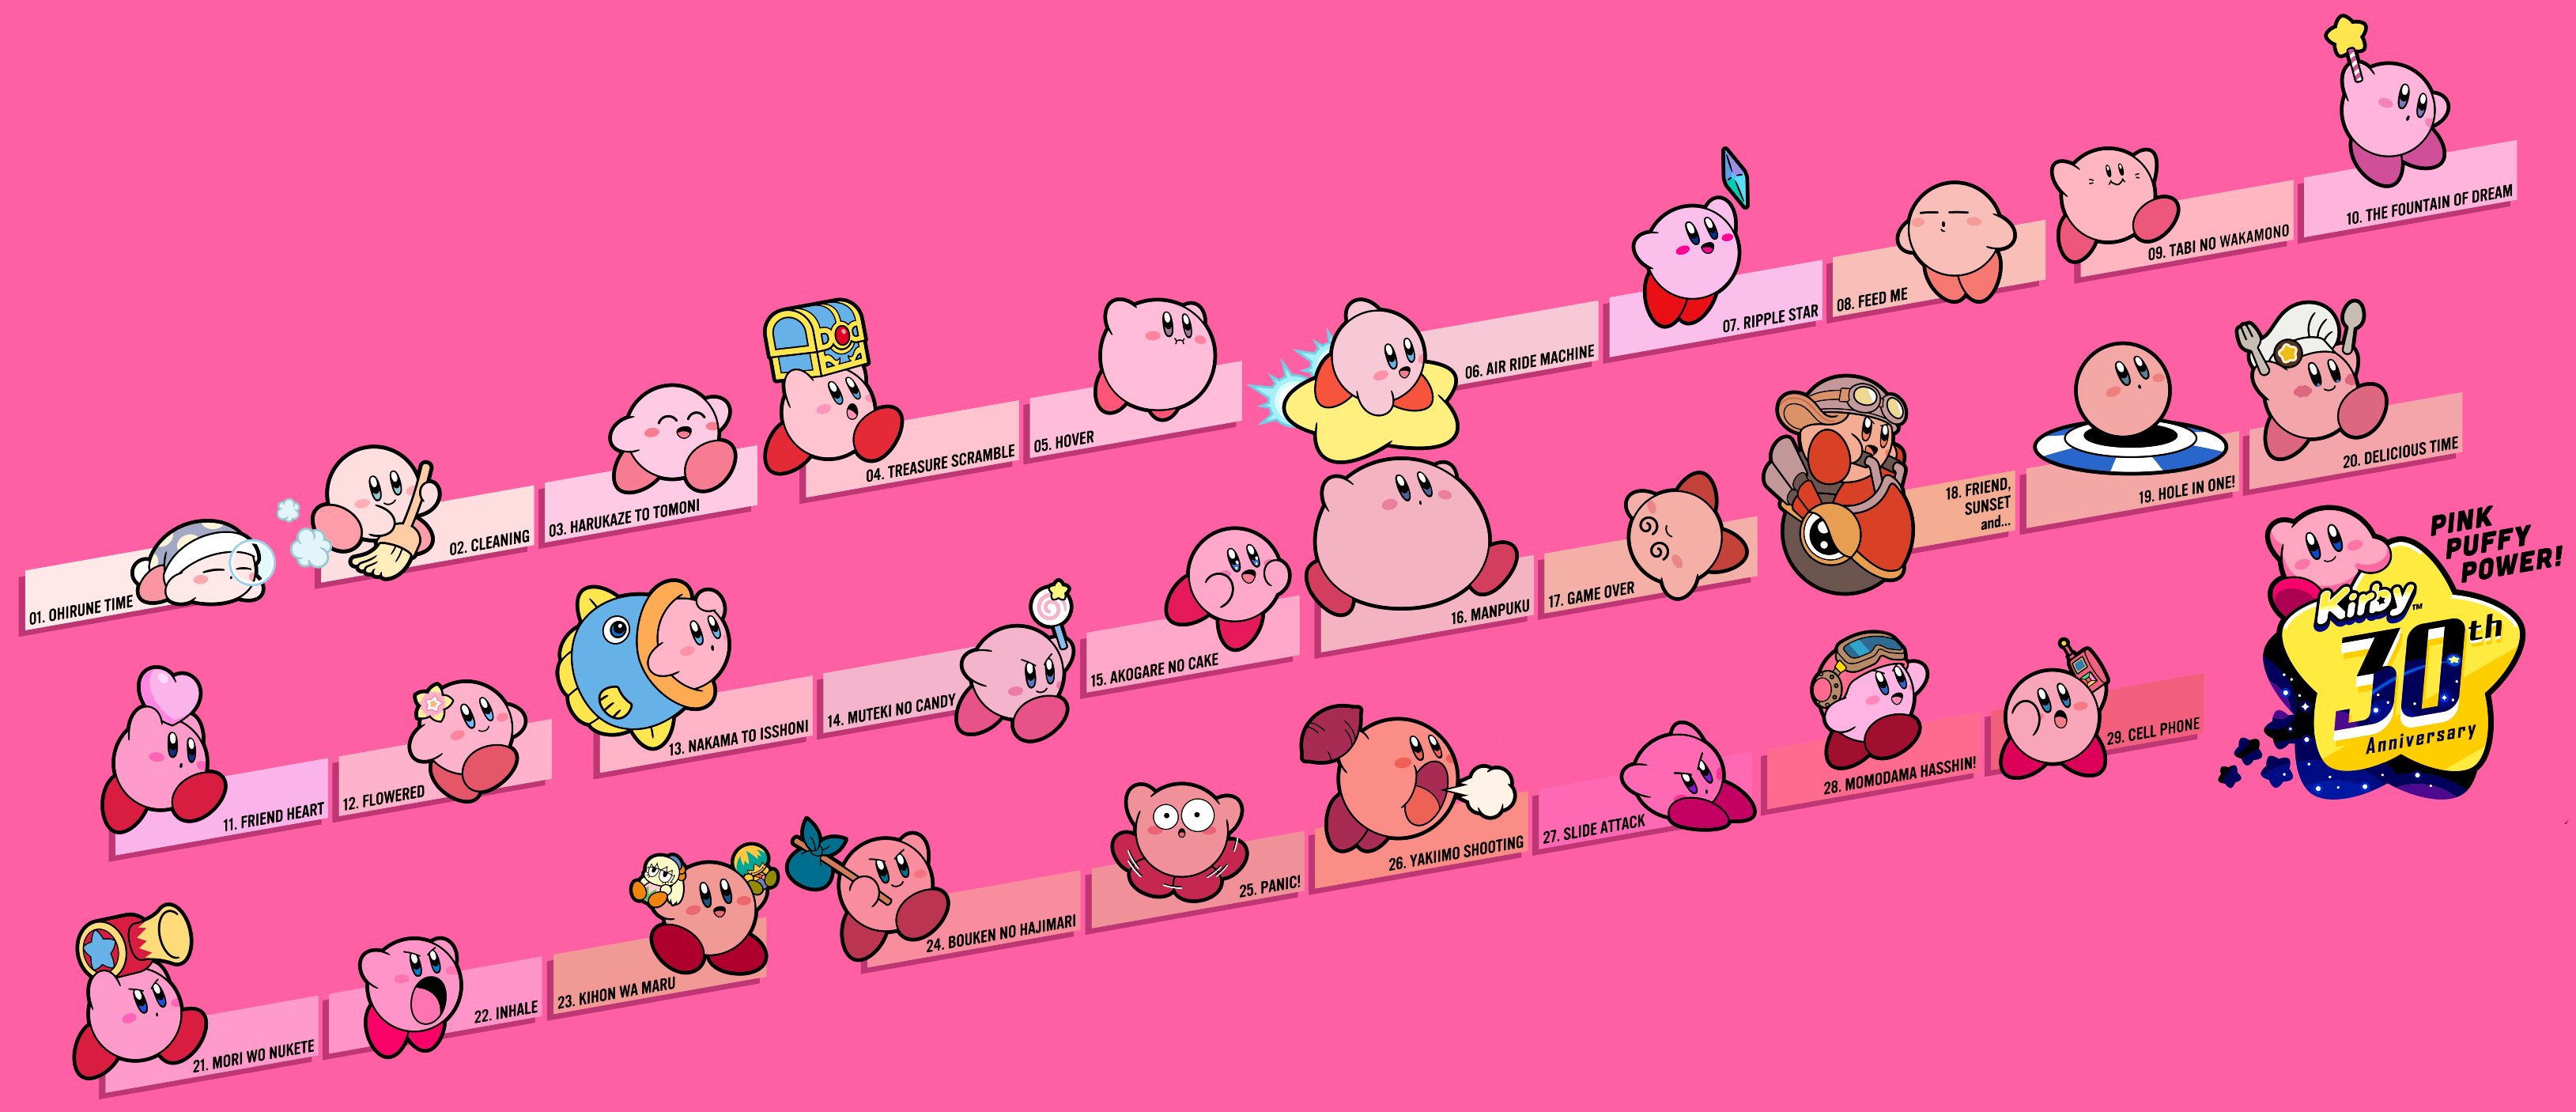 ordered the kirby 30th wallpaper numerically rKirby